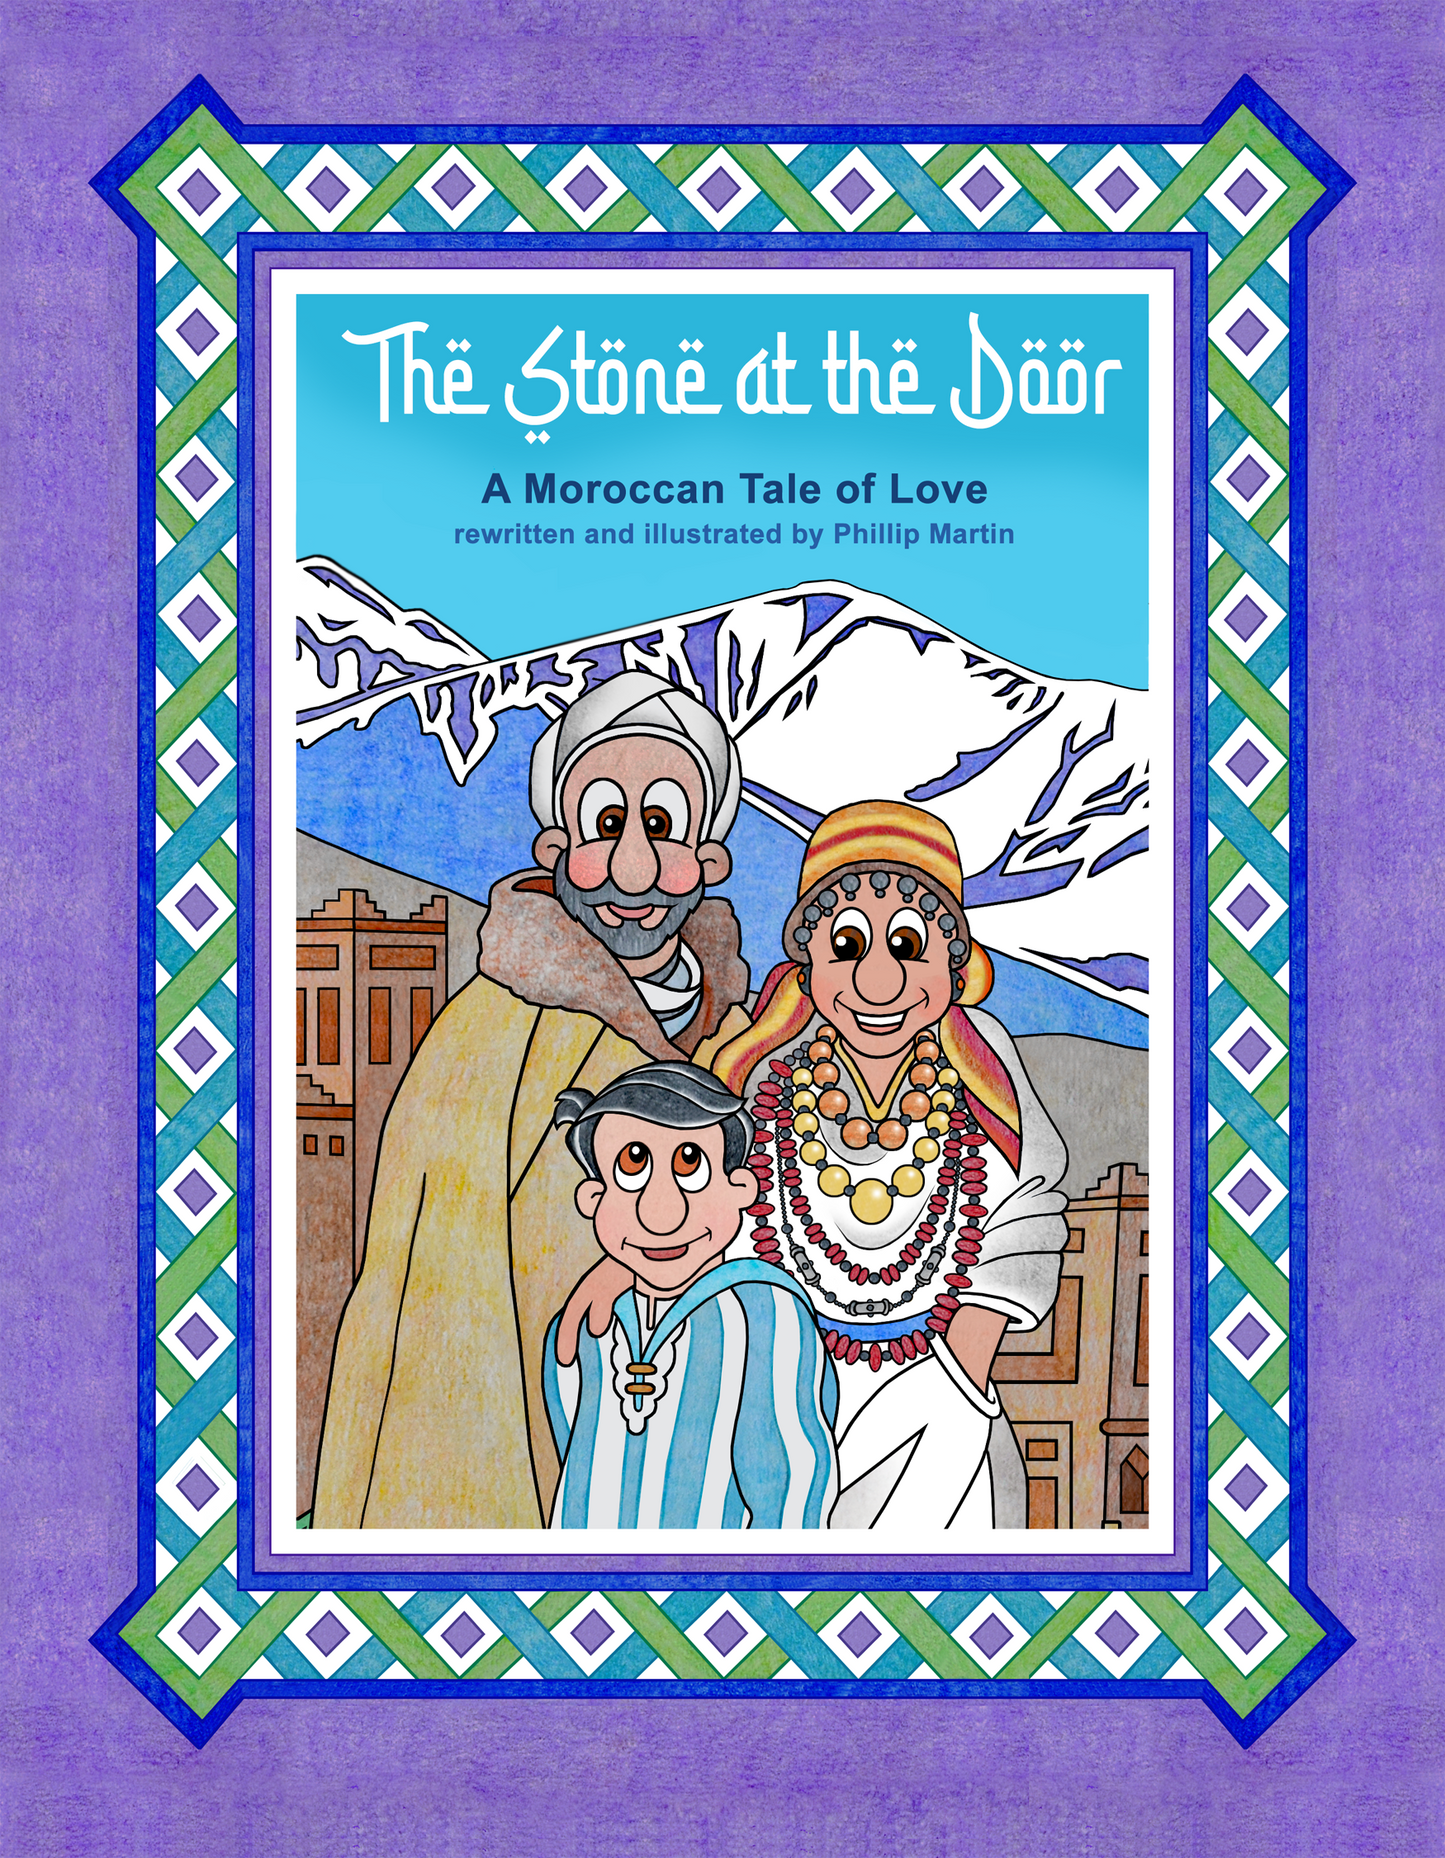 The Stone at the Door – A Moroccan Tale of Love